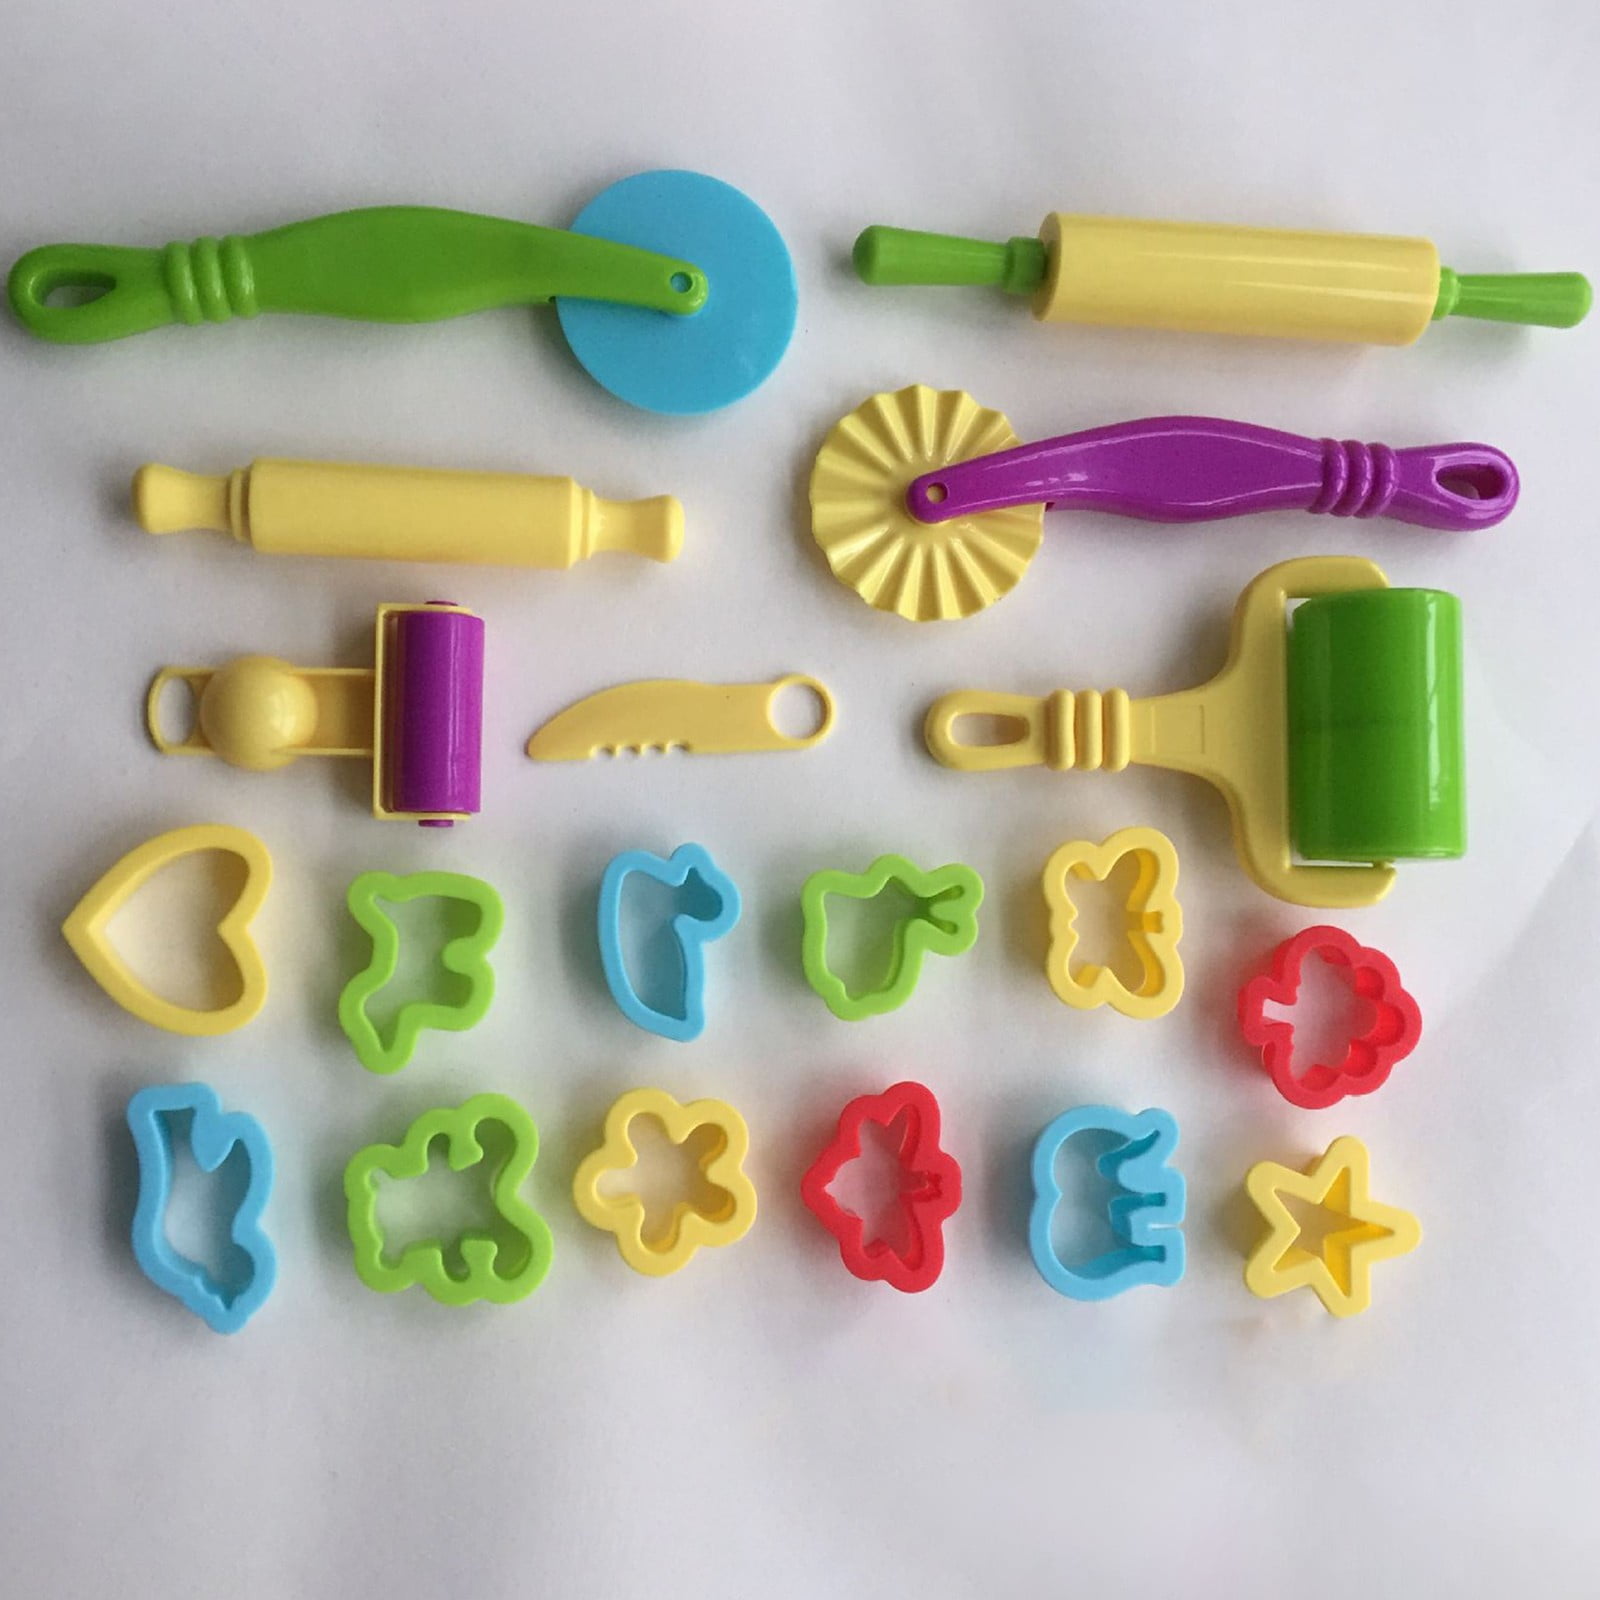 16 Piece Clay And Dough Modeling Tools Kit For Kids Play- Plastic Doug –  Toyrifik Toys